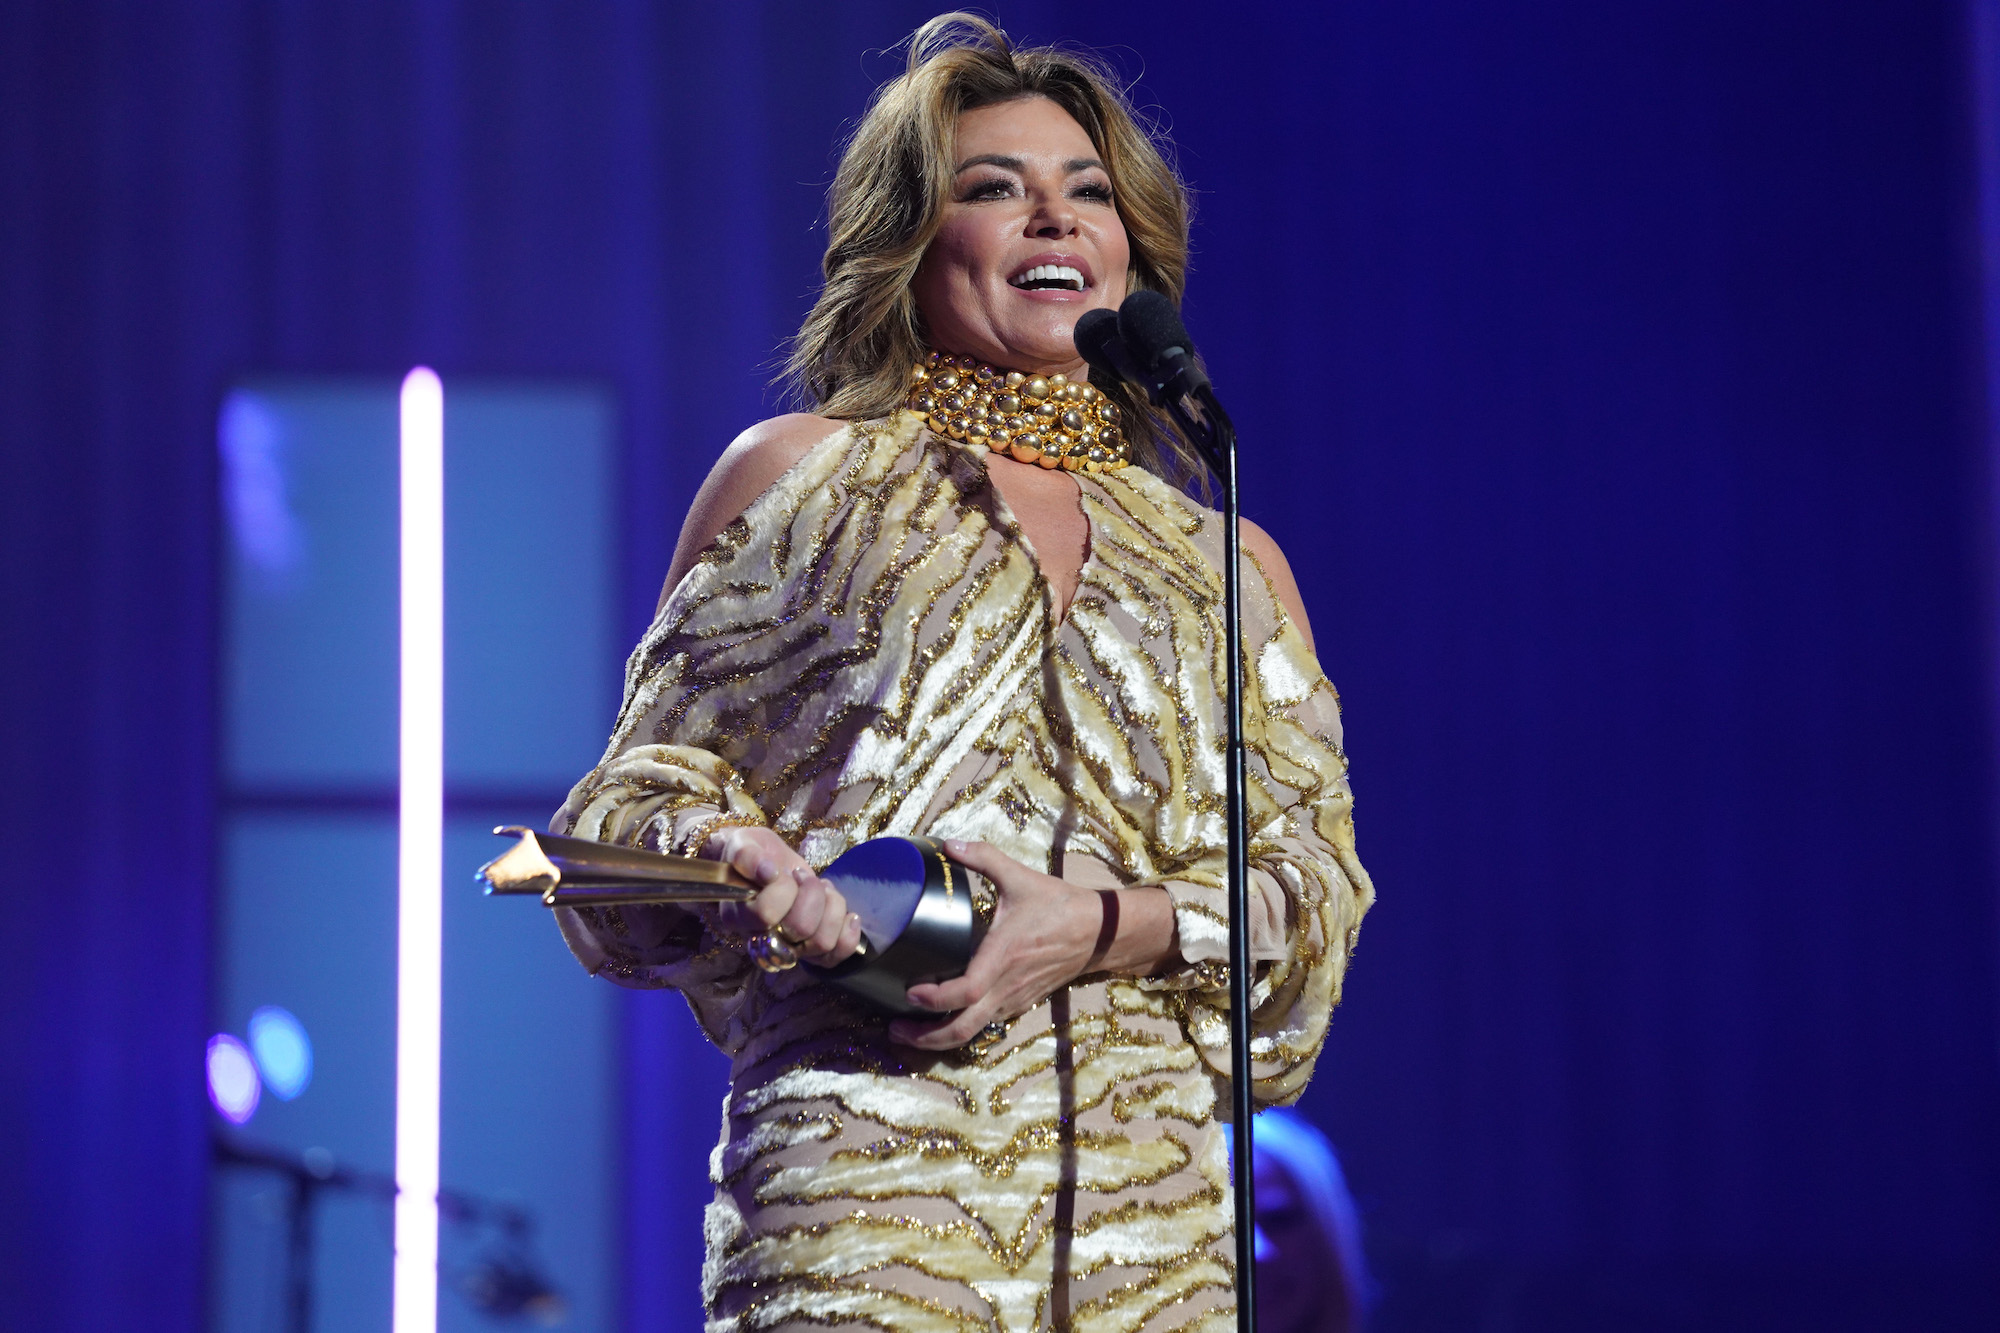 Shania Twain, who sang as a hotel singer before becoming a global superstar, wearing gold and accepting an award.